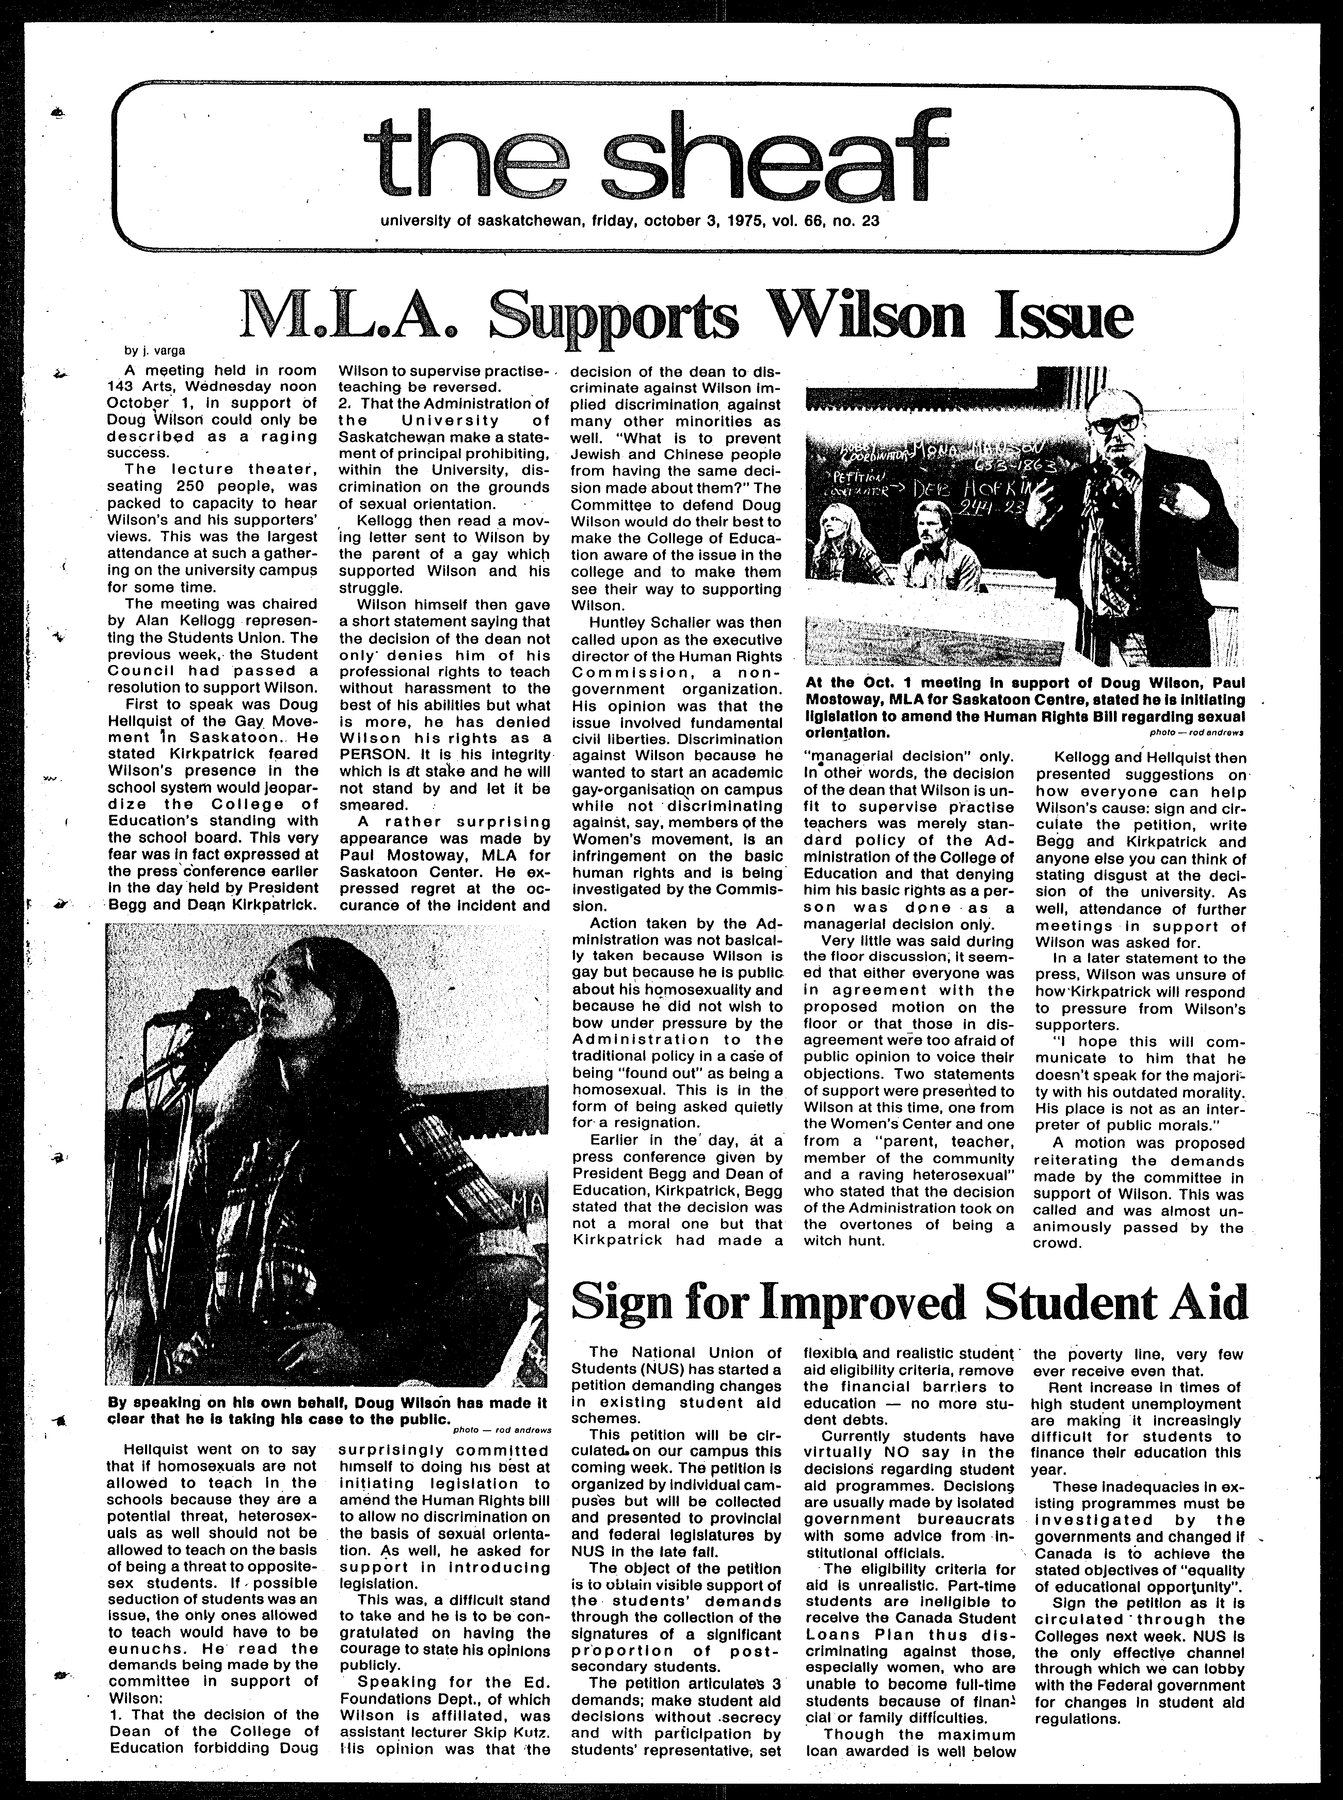 mla supports wilson issue